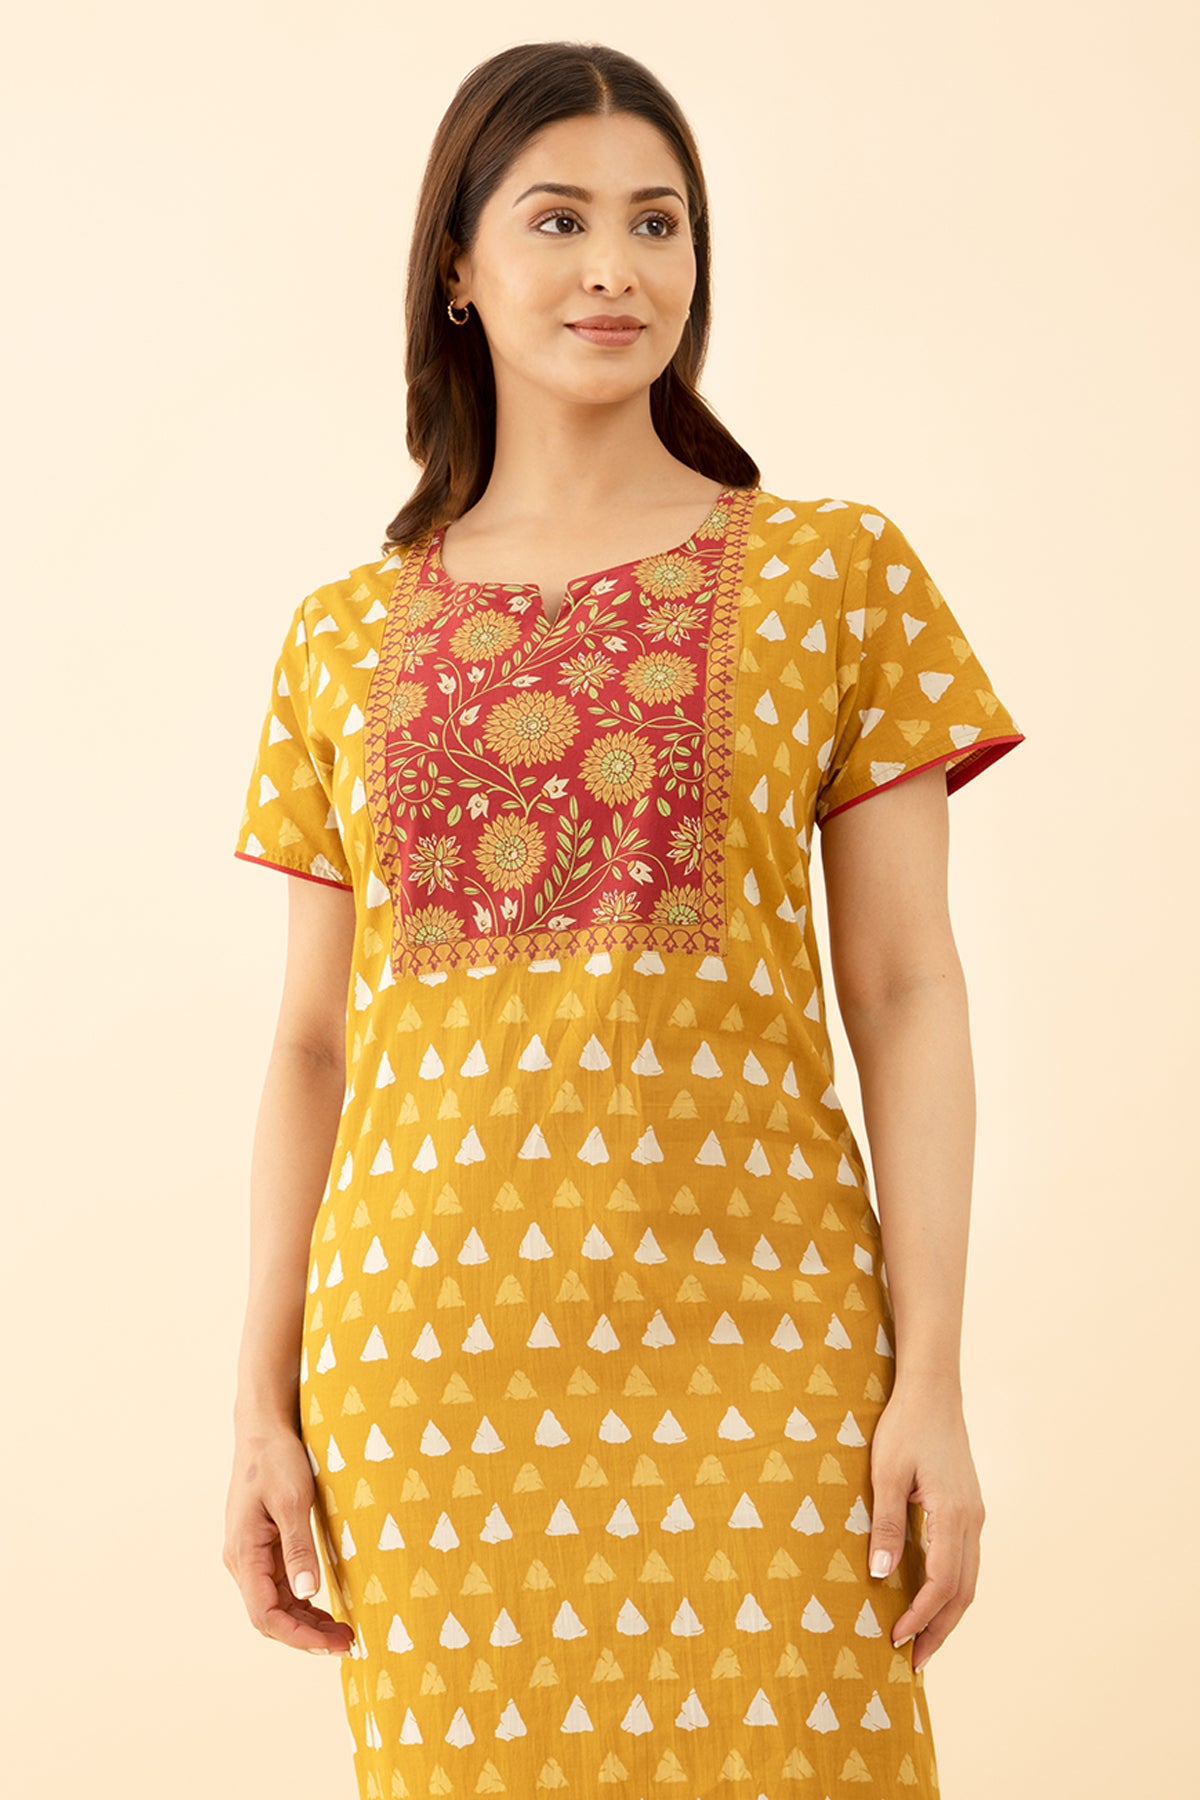 Mustard Embroidered Nighty Geometric Floral Printed